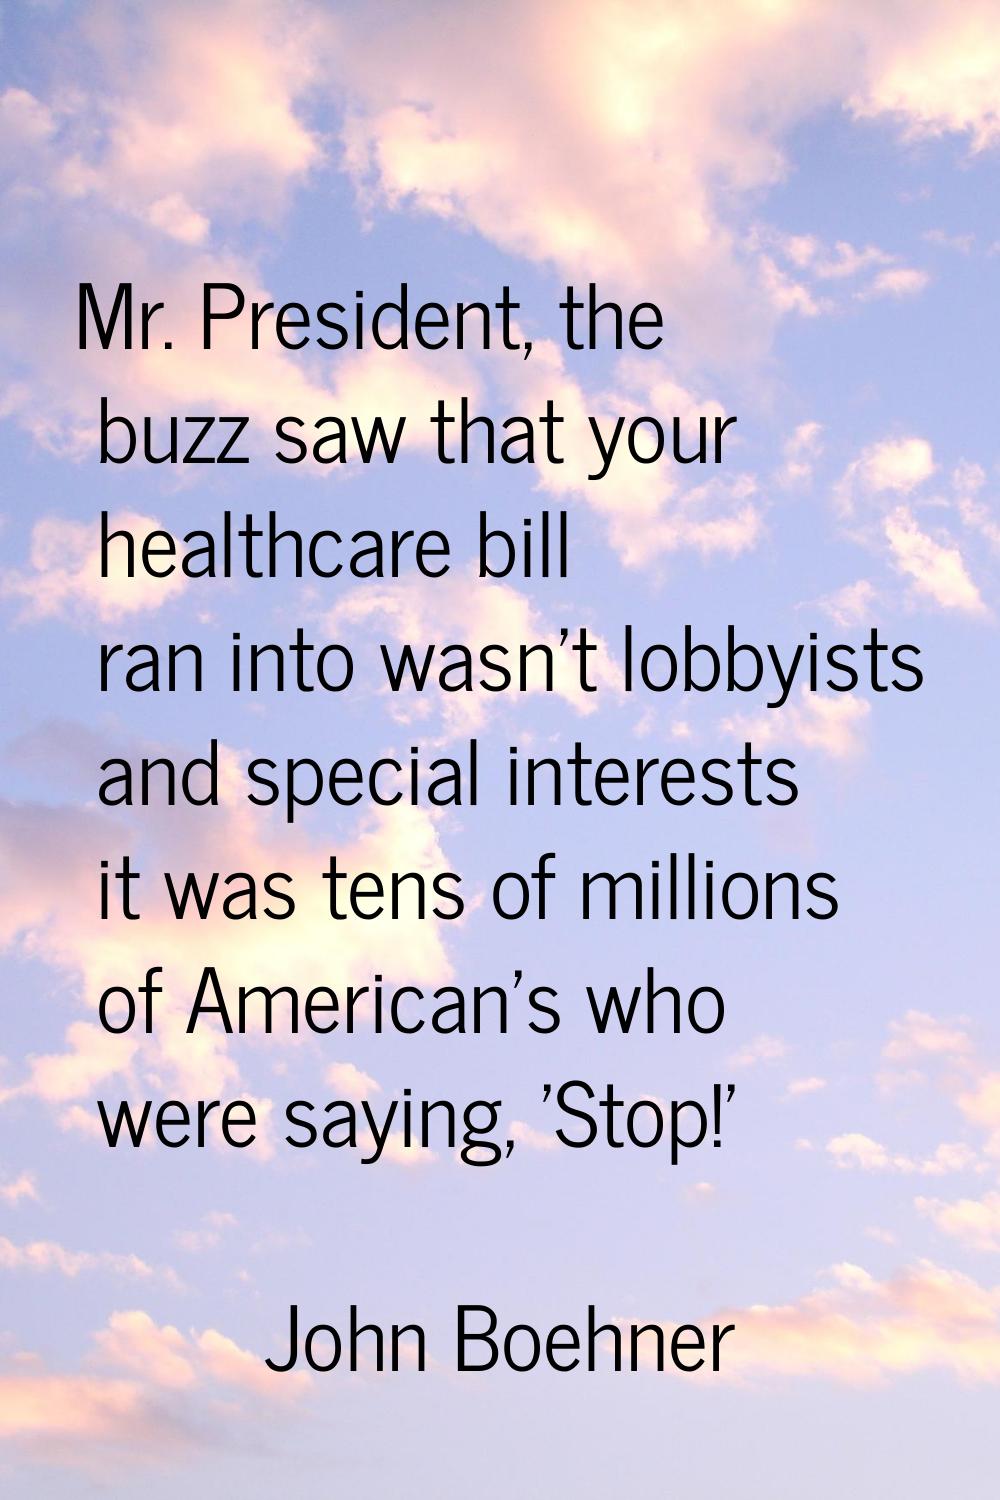 Mr. President, the buzz saw that your healthcare bill ran into wasn't lobbyists and special interes